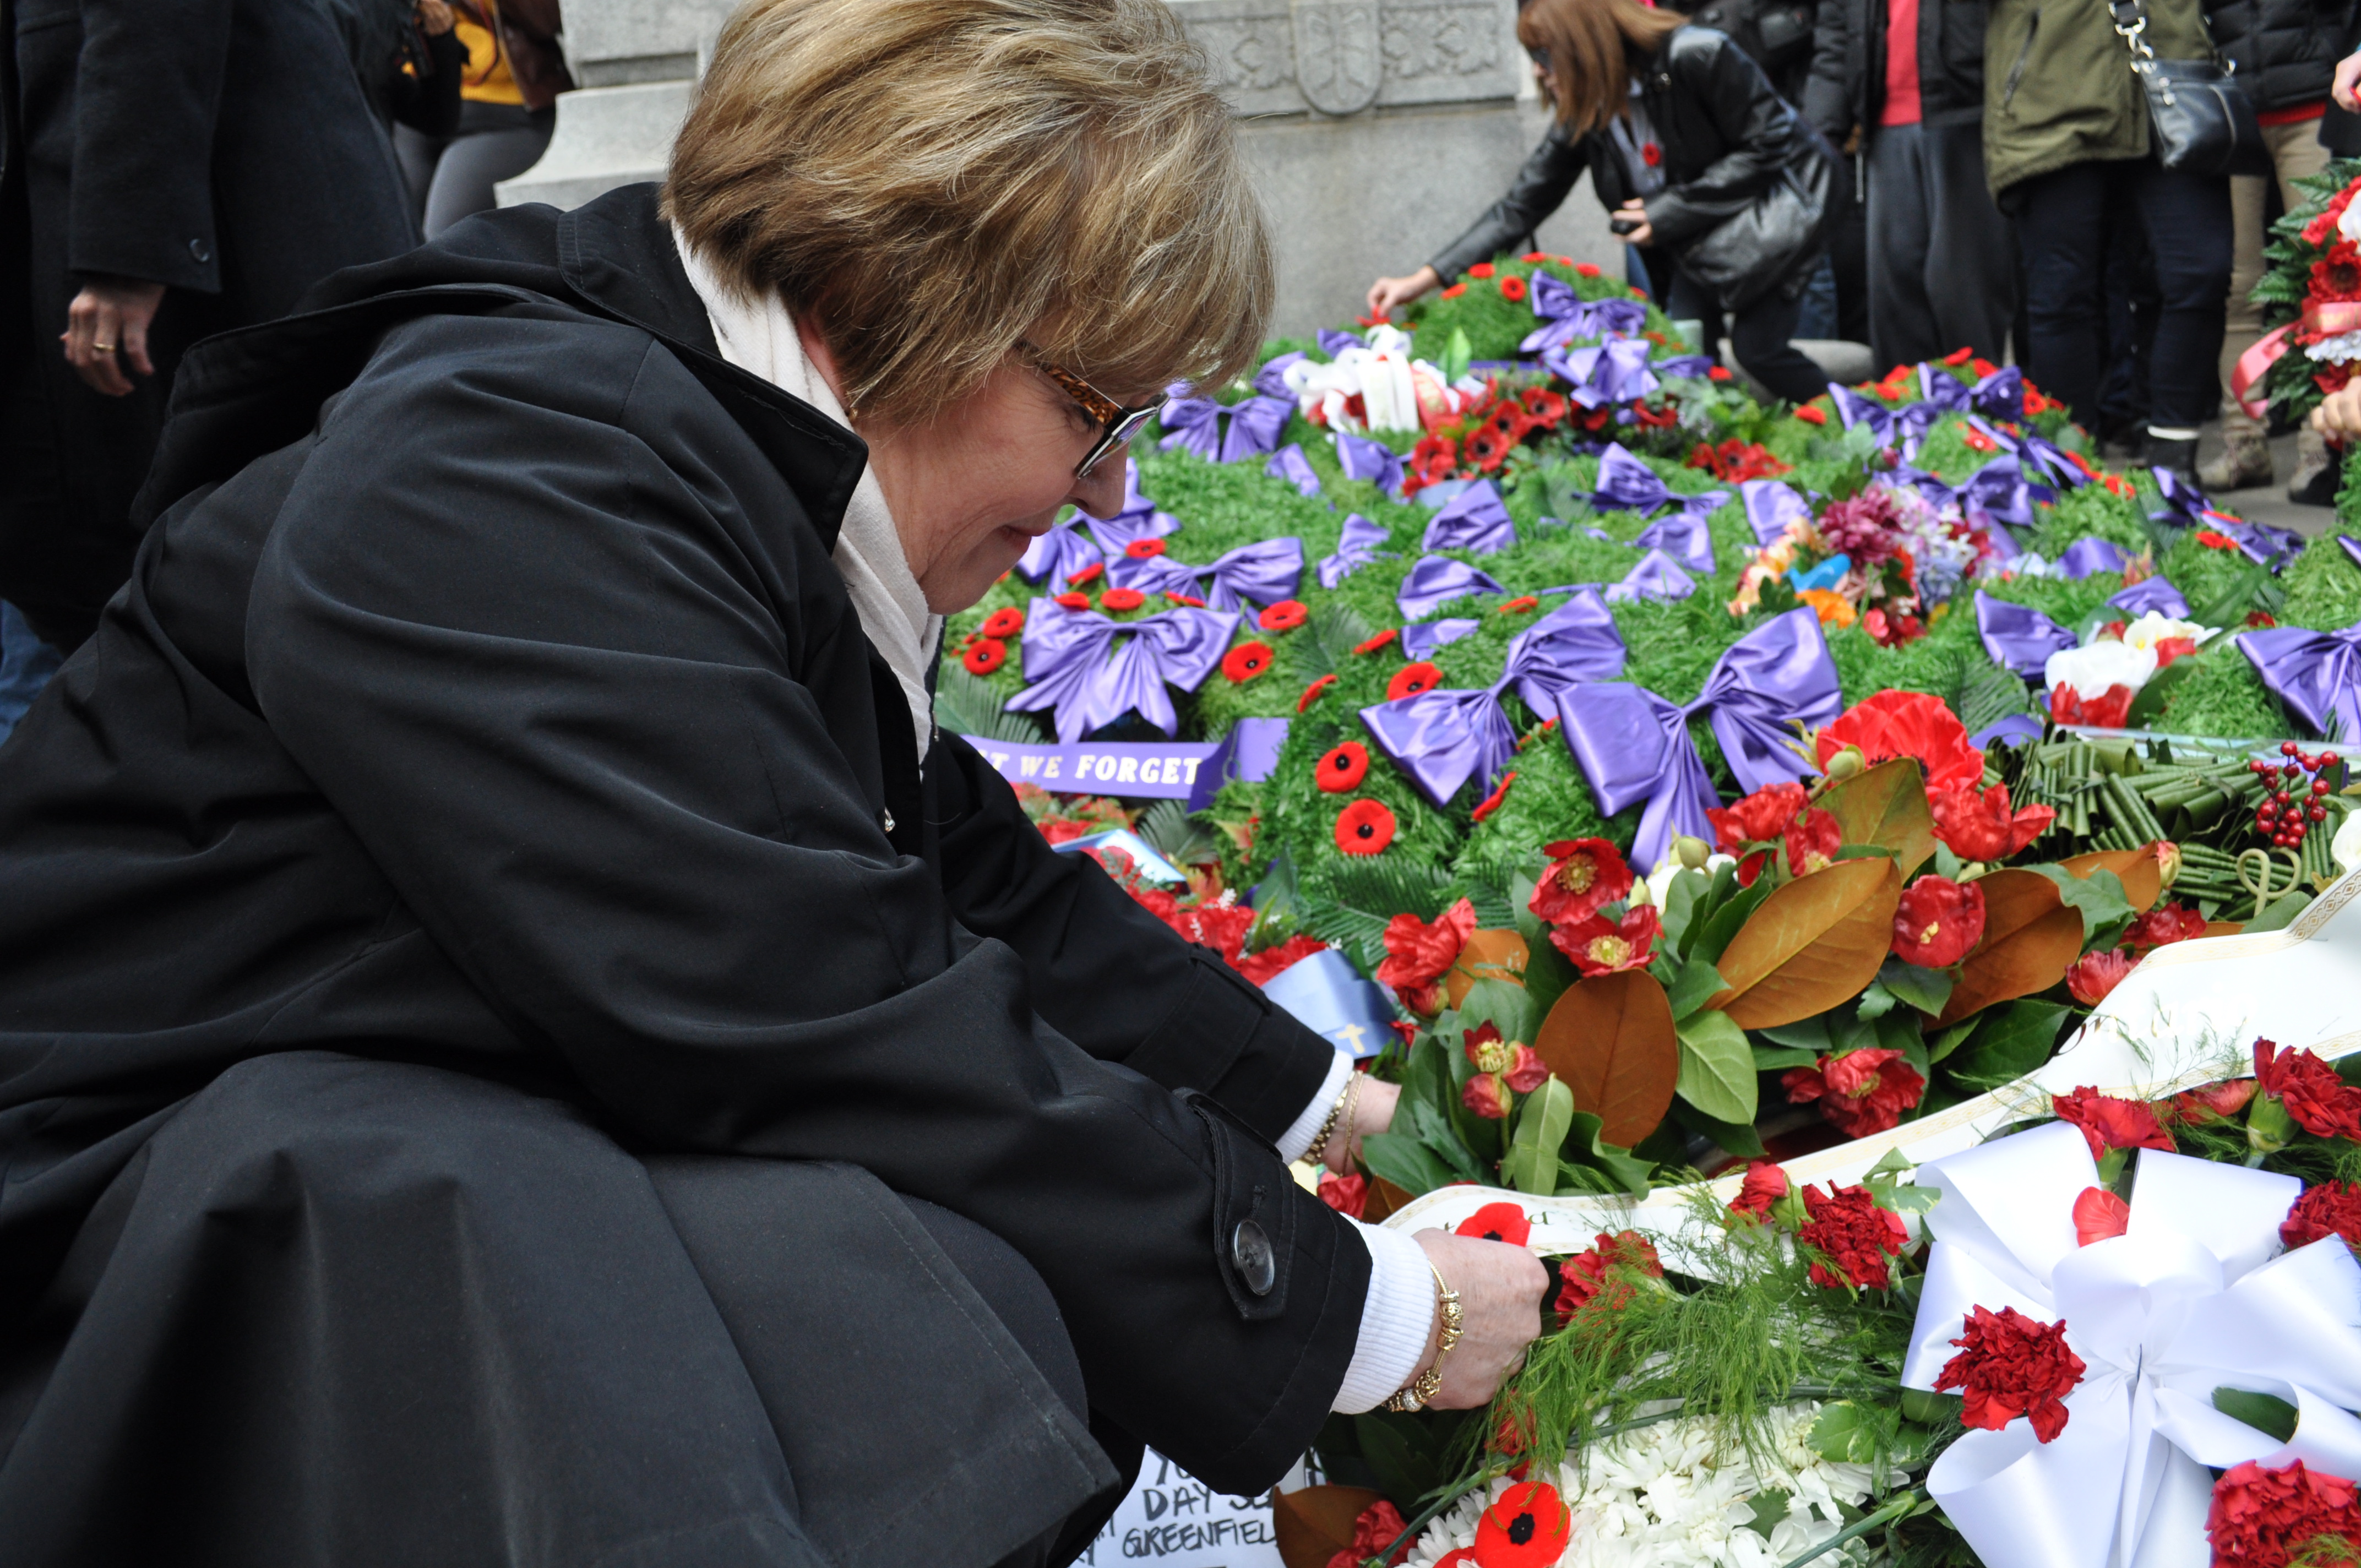 Normal Nicholson is up close looking at a white ribbon across a wreath